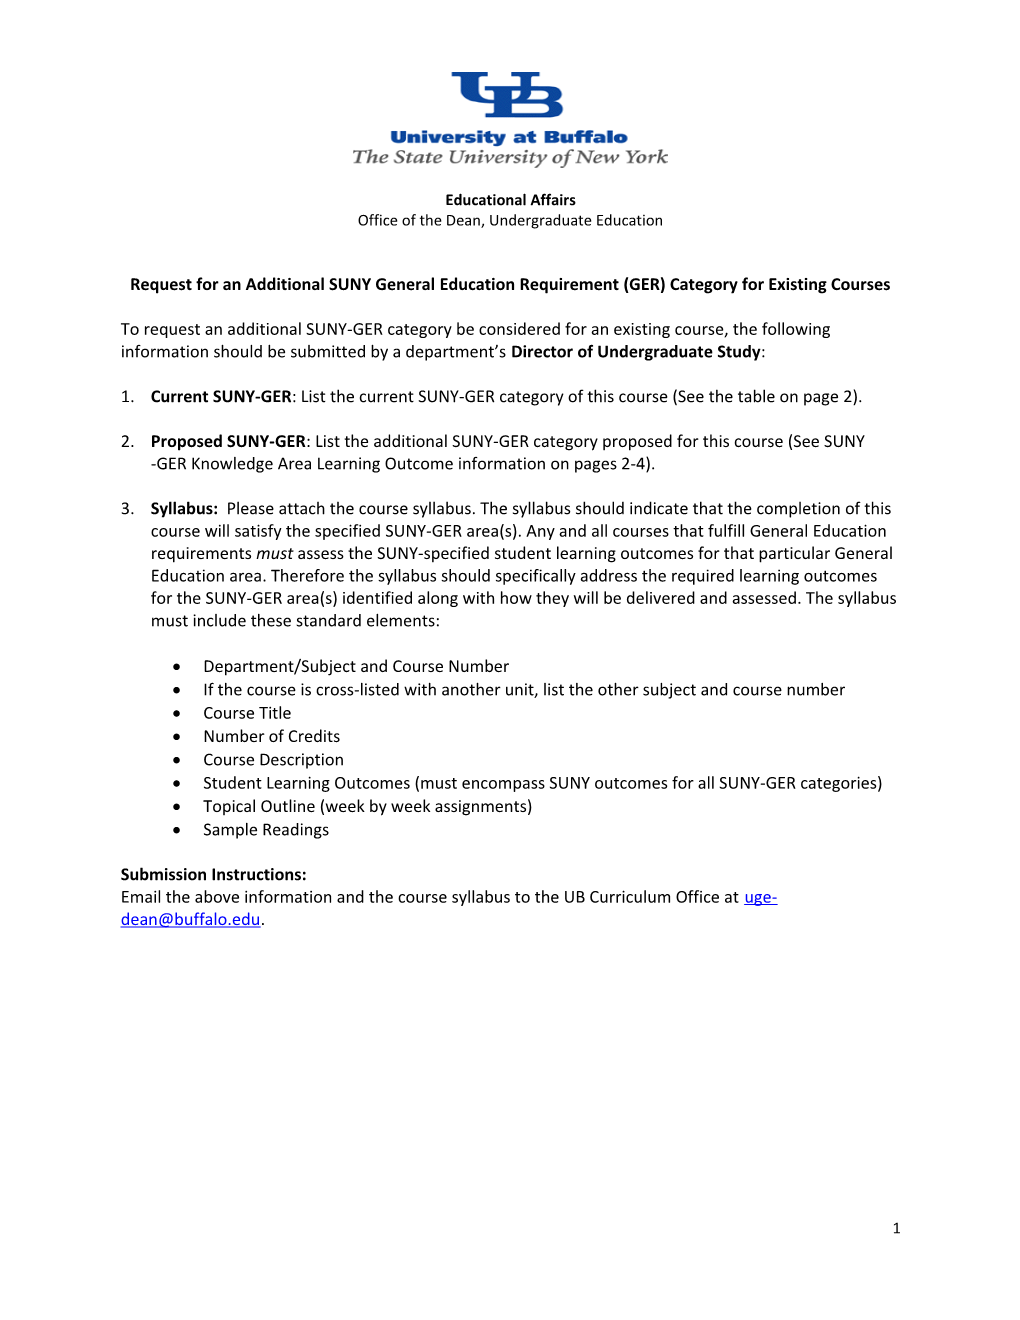 Proposal: Summer 2004 Undergraduate Learning Experience in Scientific Research